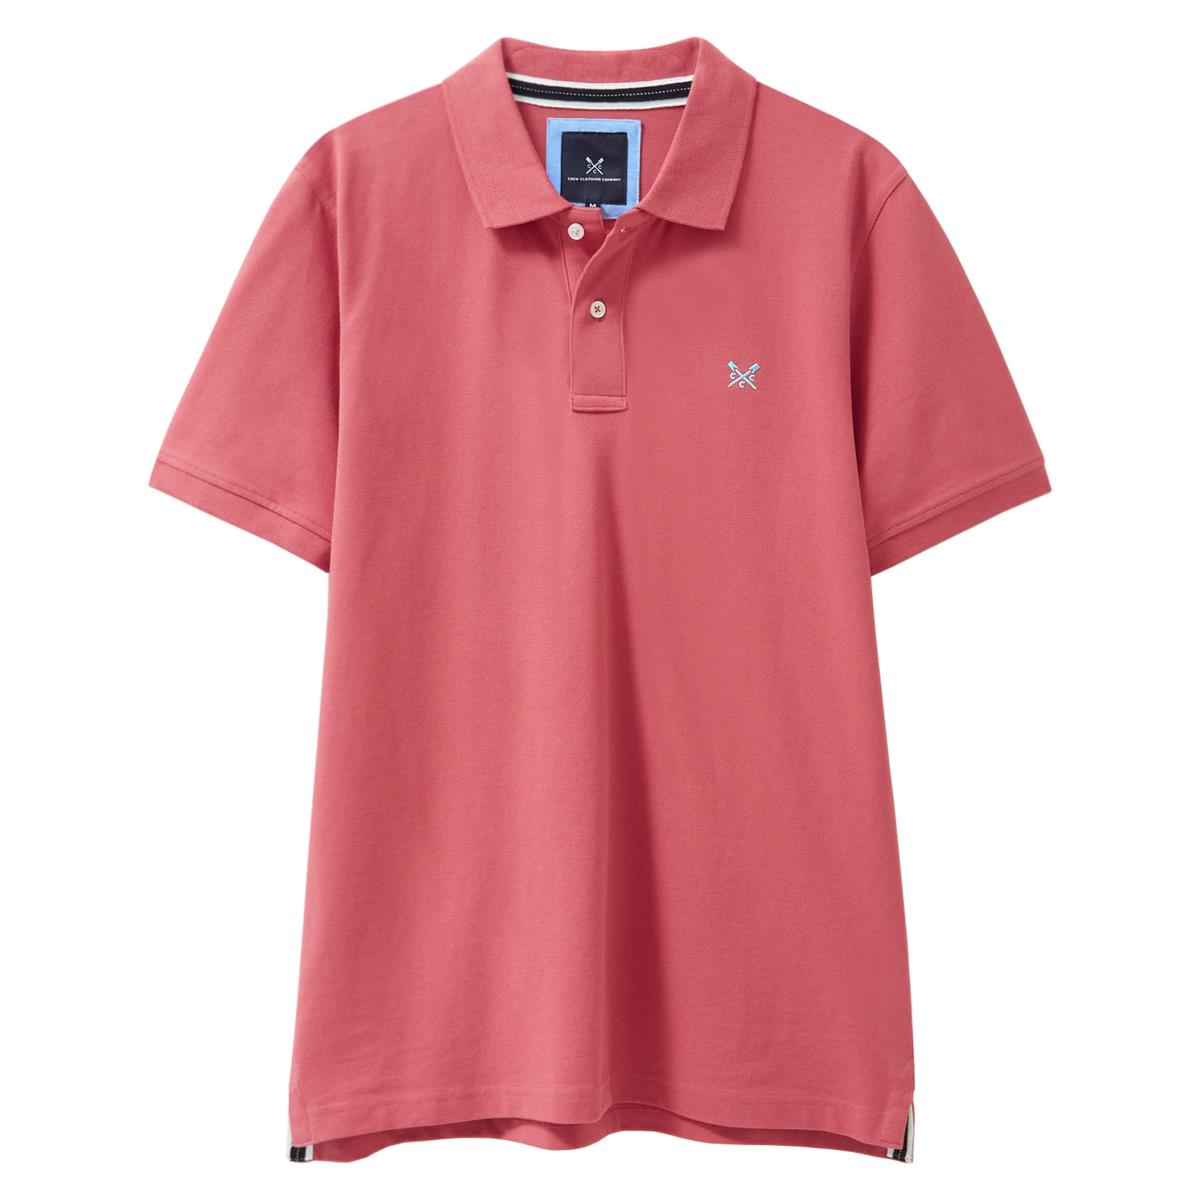 What material is used in the Crew Clothing classic pique polo shirts?